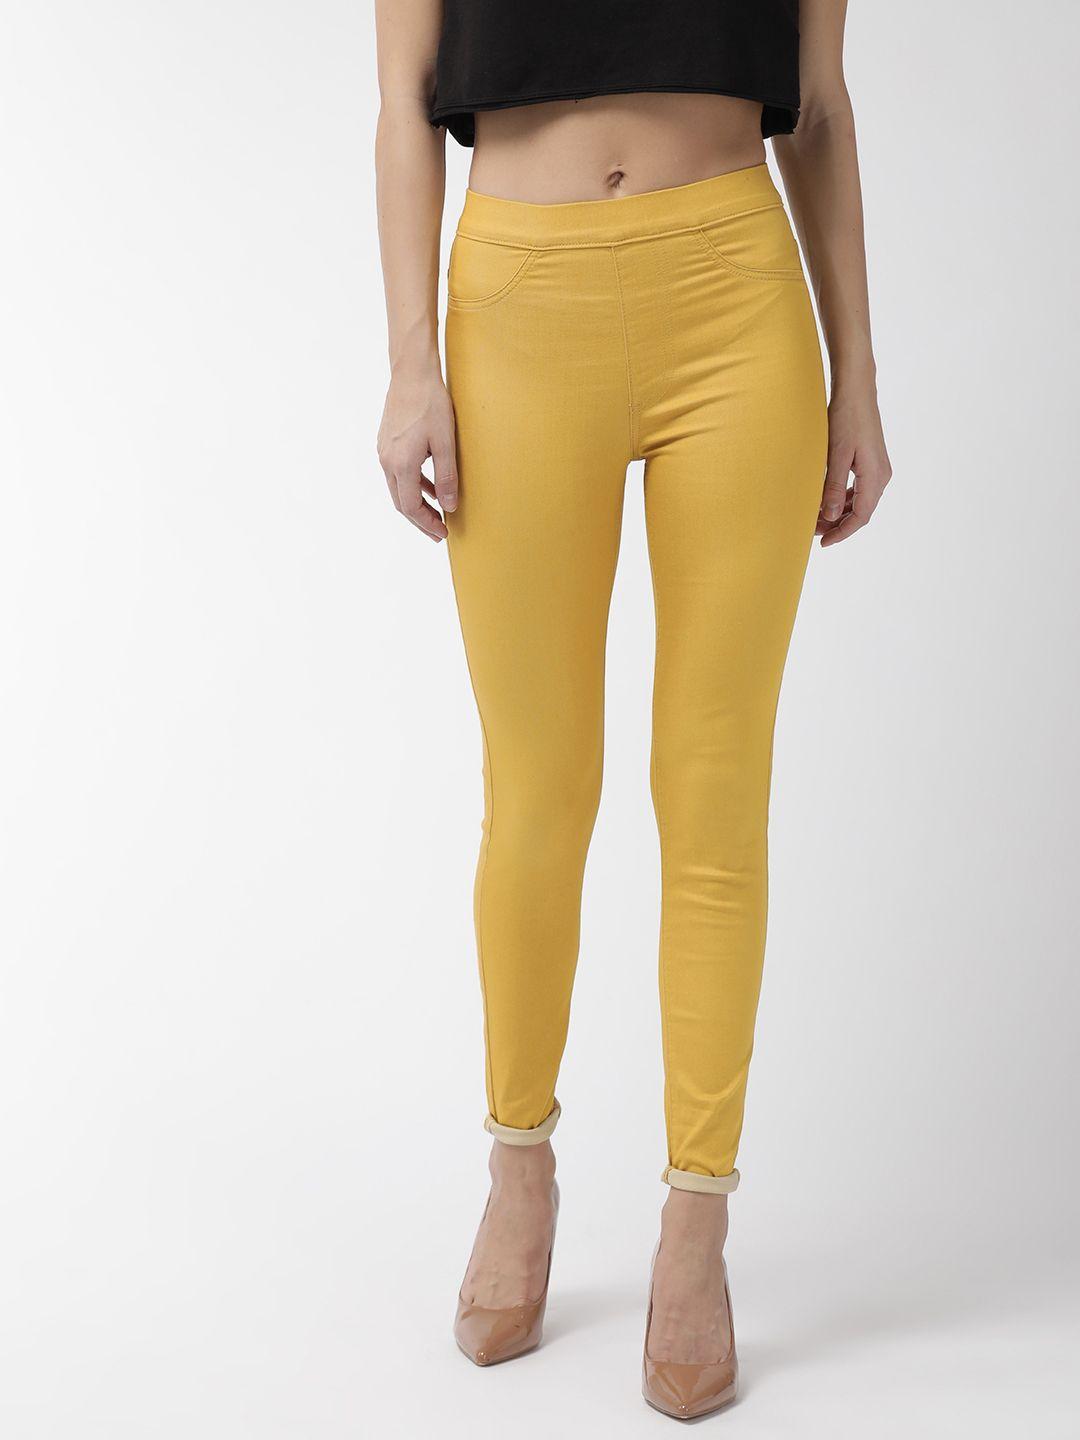 marks & spencer women mustard yellow solid jeggings